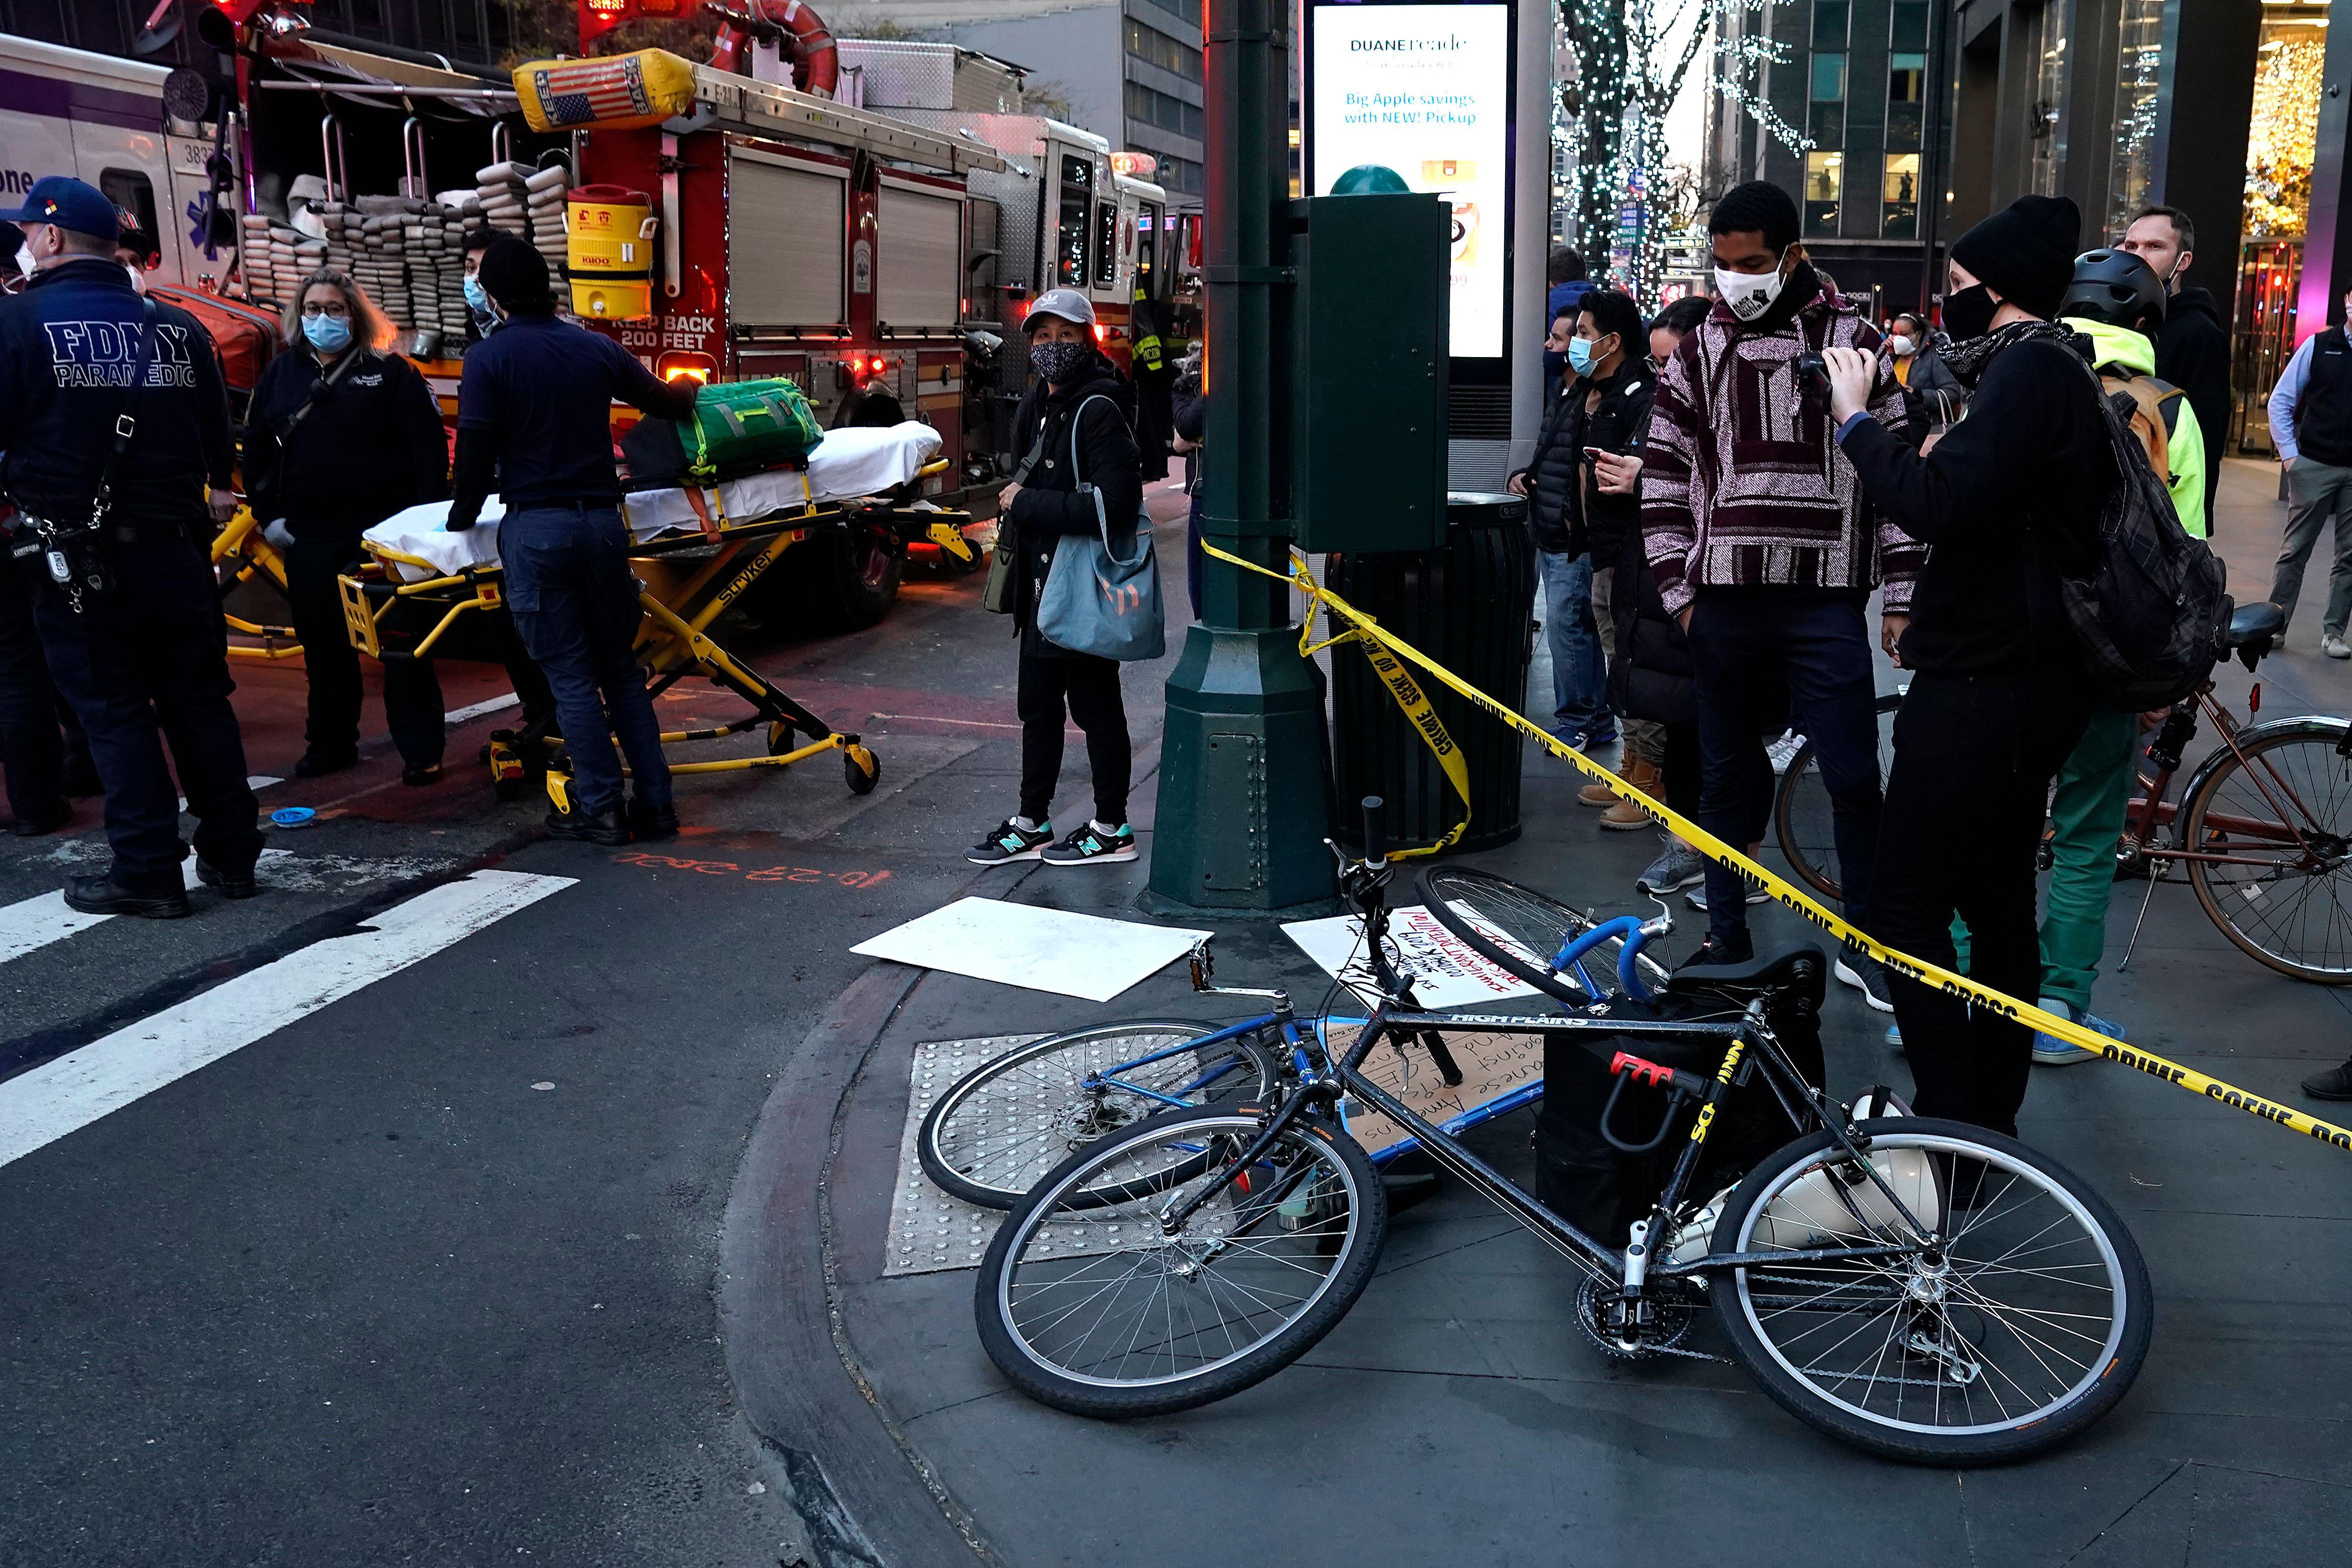 Two bikes are seen lying flat near police ticker tape. To the left, masked people hold a stretcher.